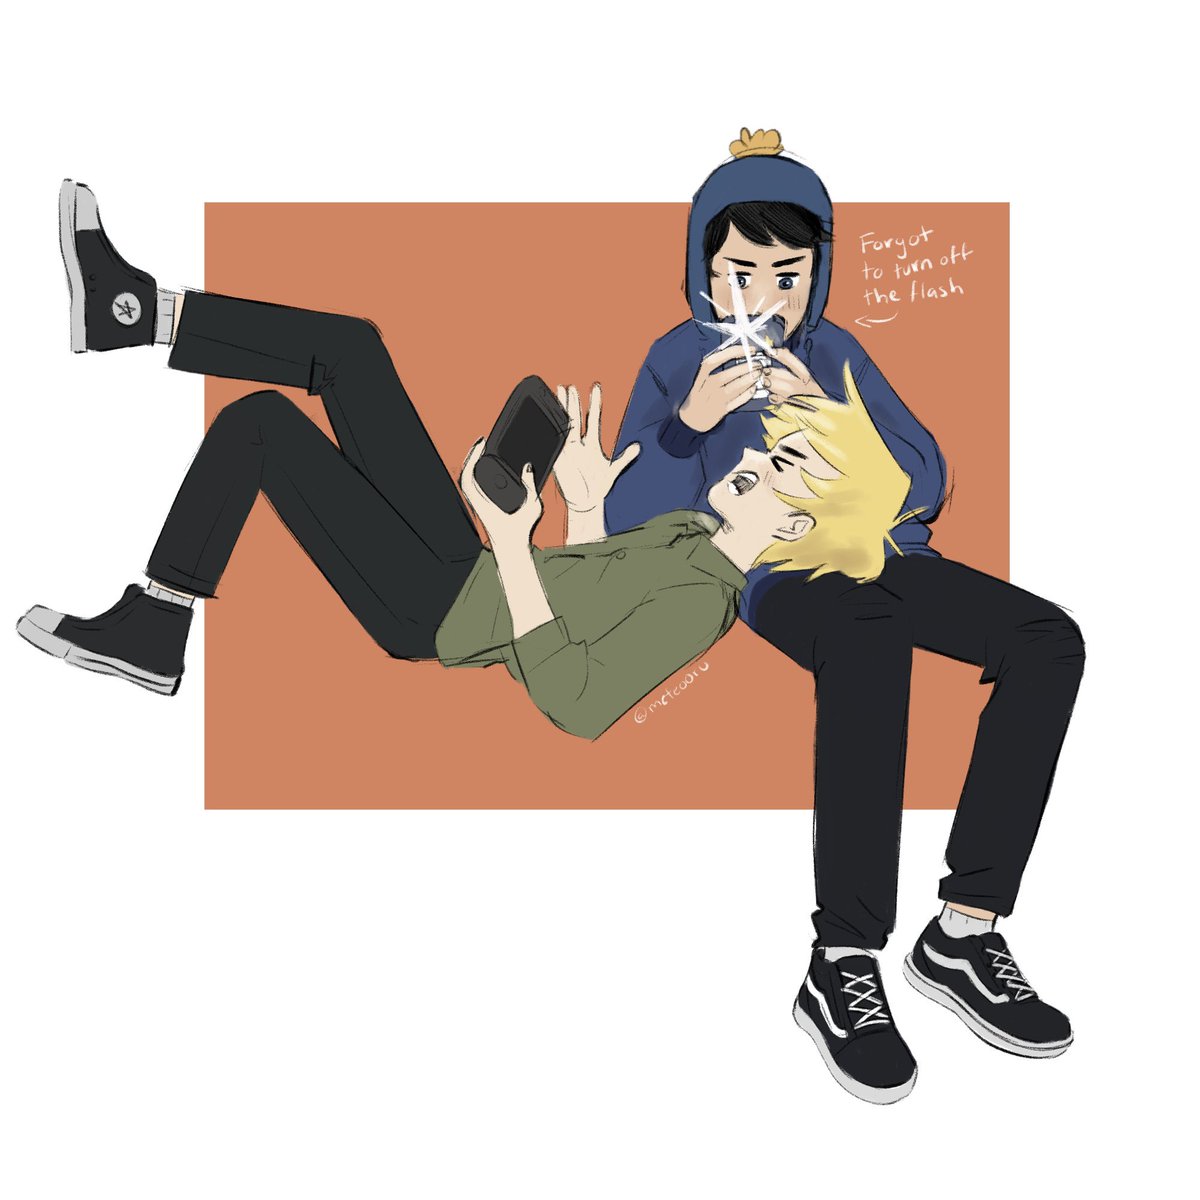 he just wanted to take a picture :(

#SouthPark #creek